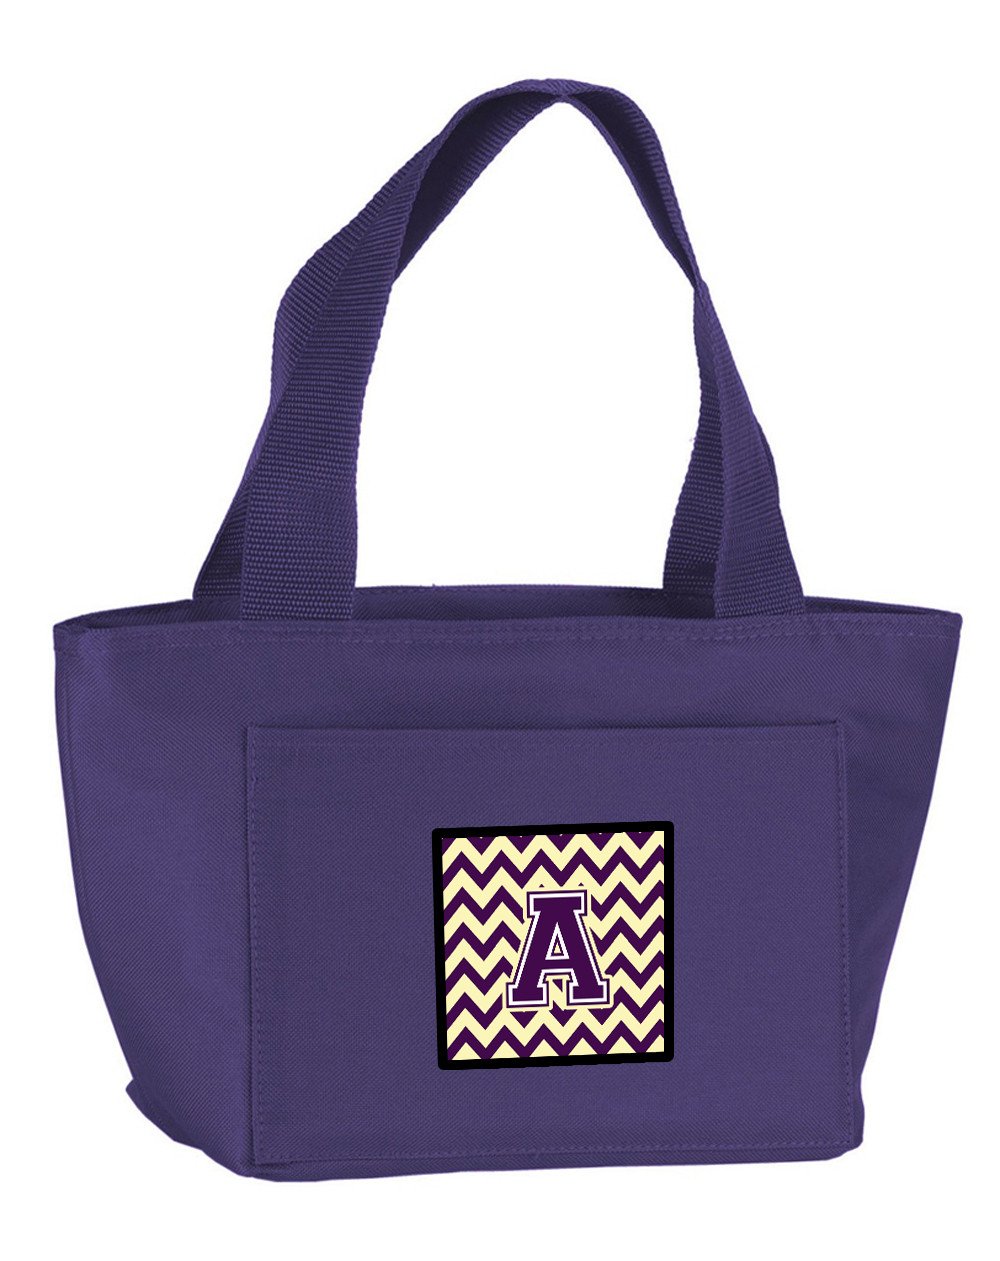 Letter A Chevron Purple and Gold Lunch Bag CJ1058-APR-8808 by Caroline's Treasures